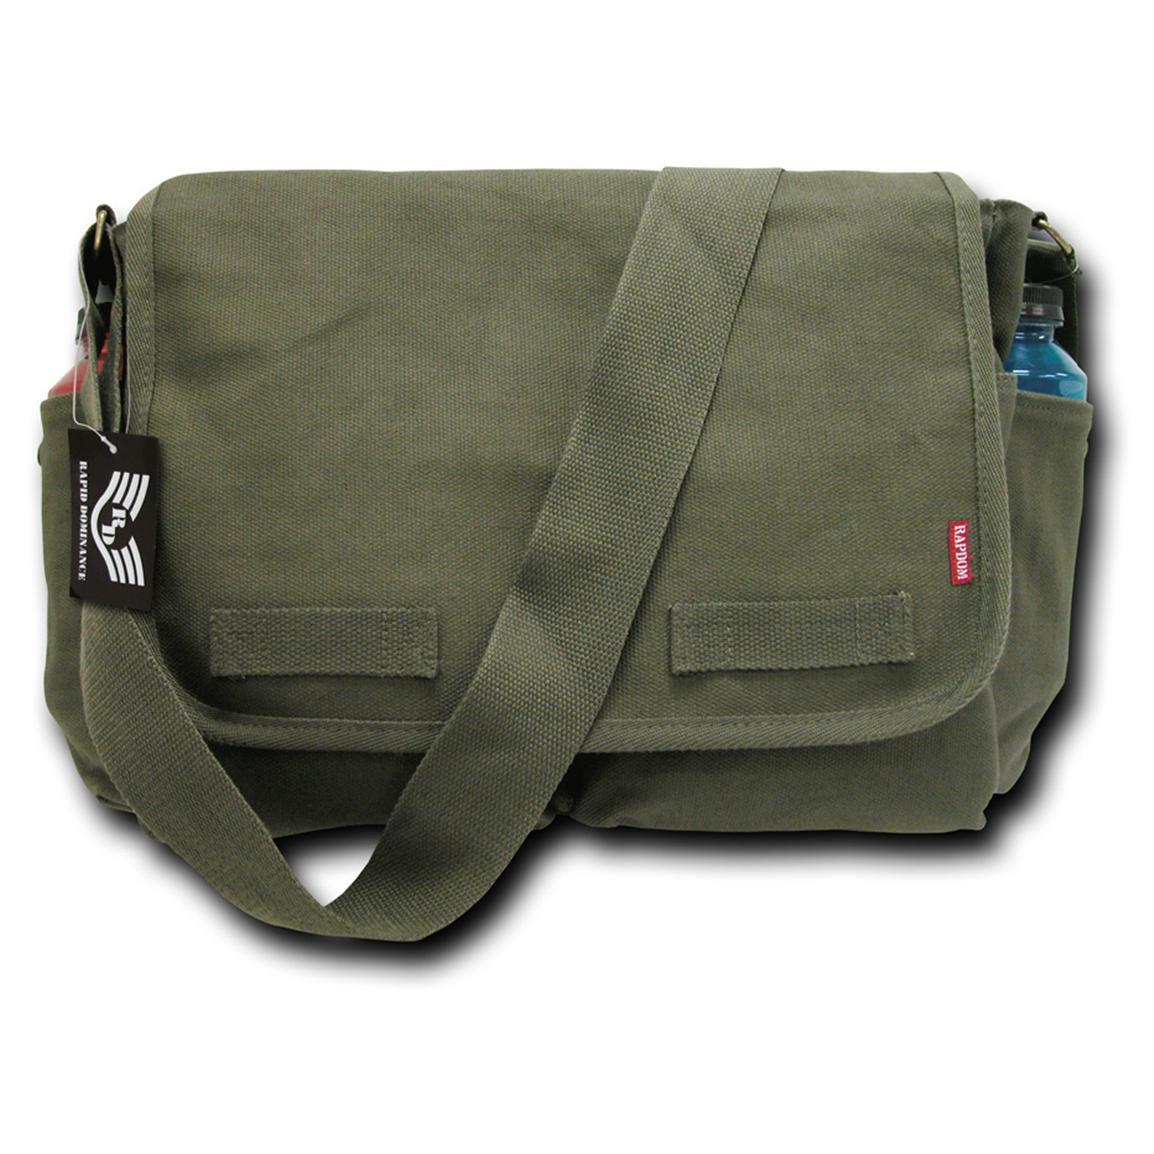 Messenger Bags For Sale Near Me 37620 | Confederated Tribes of the Umatilla Indian Reservation